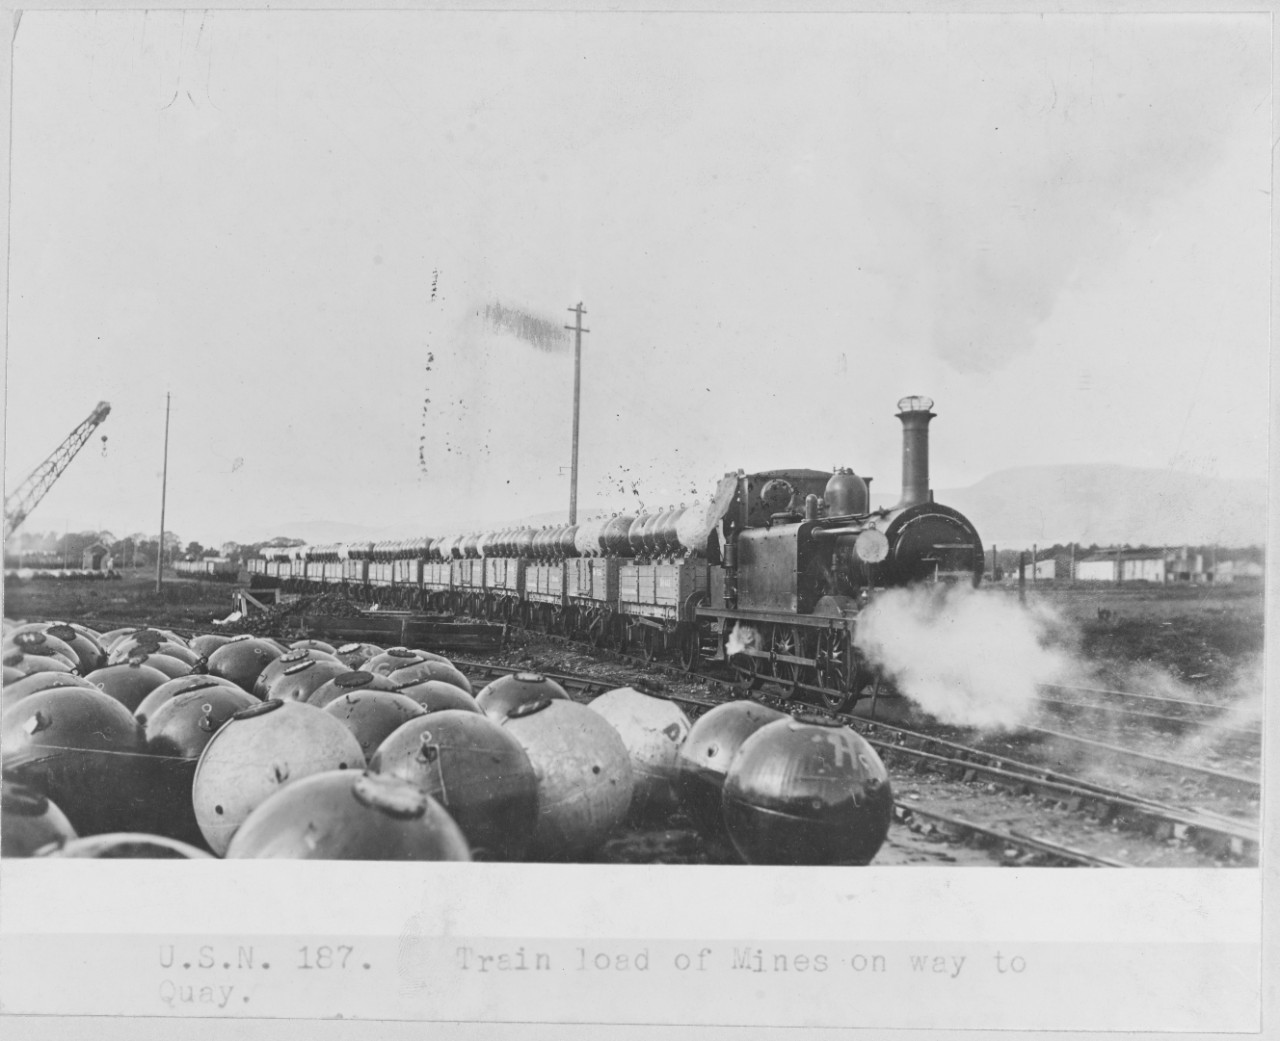 USN 187. Train load of Mines on way to Quay. 1918